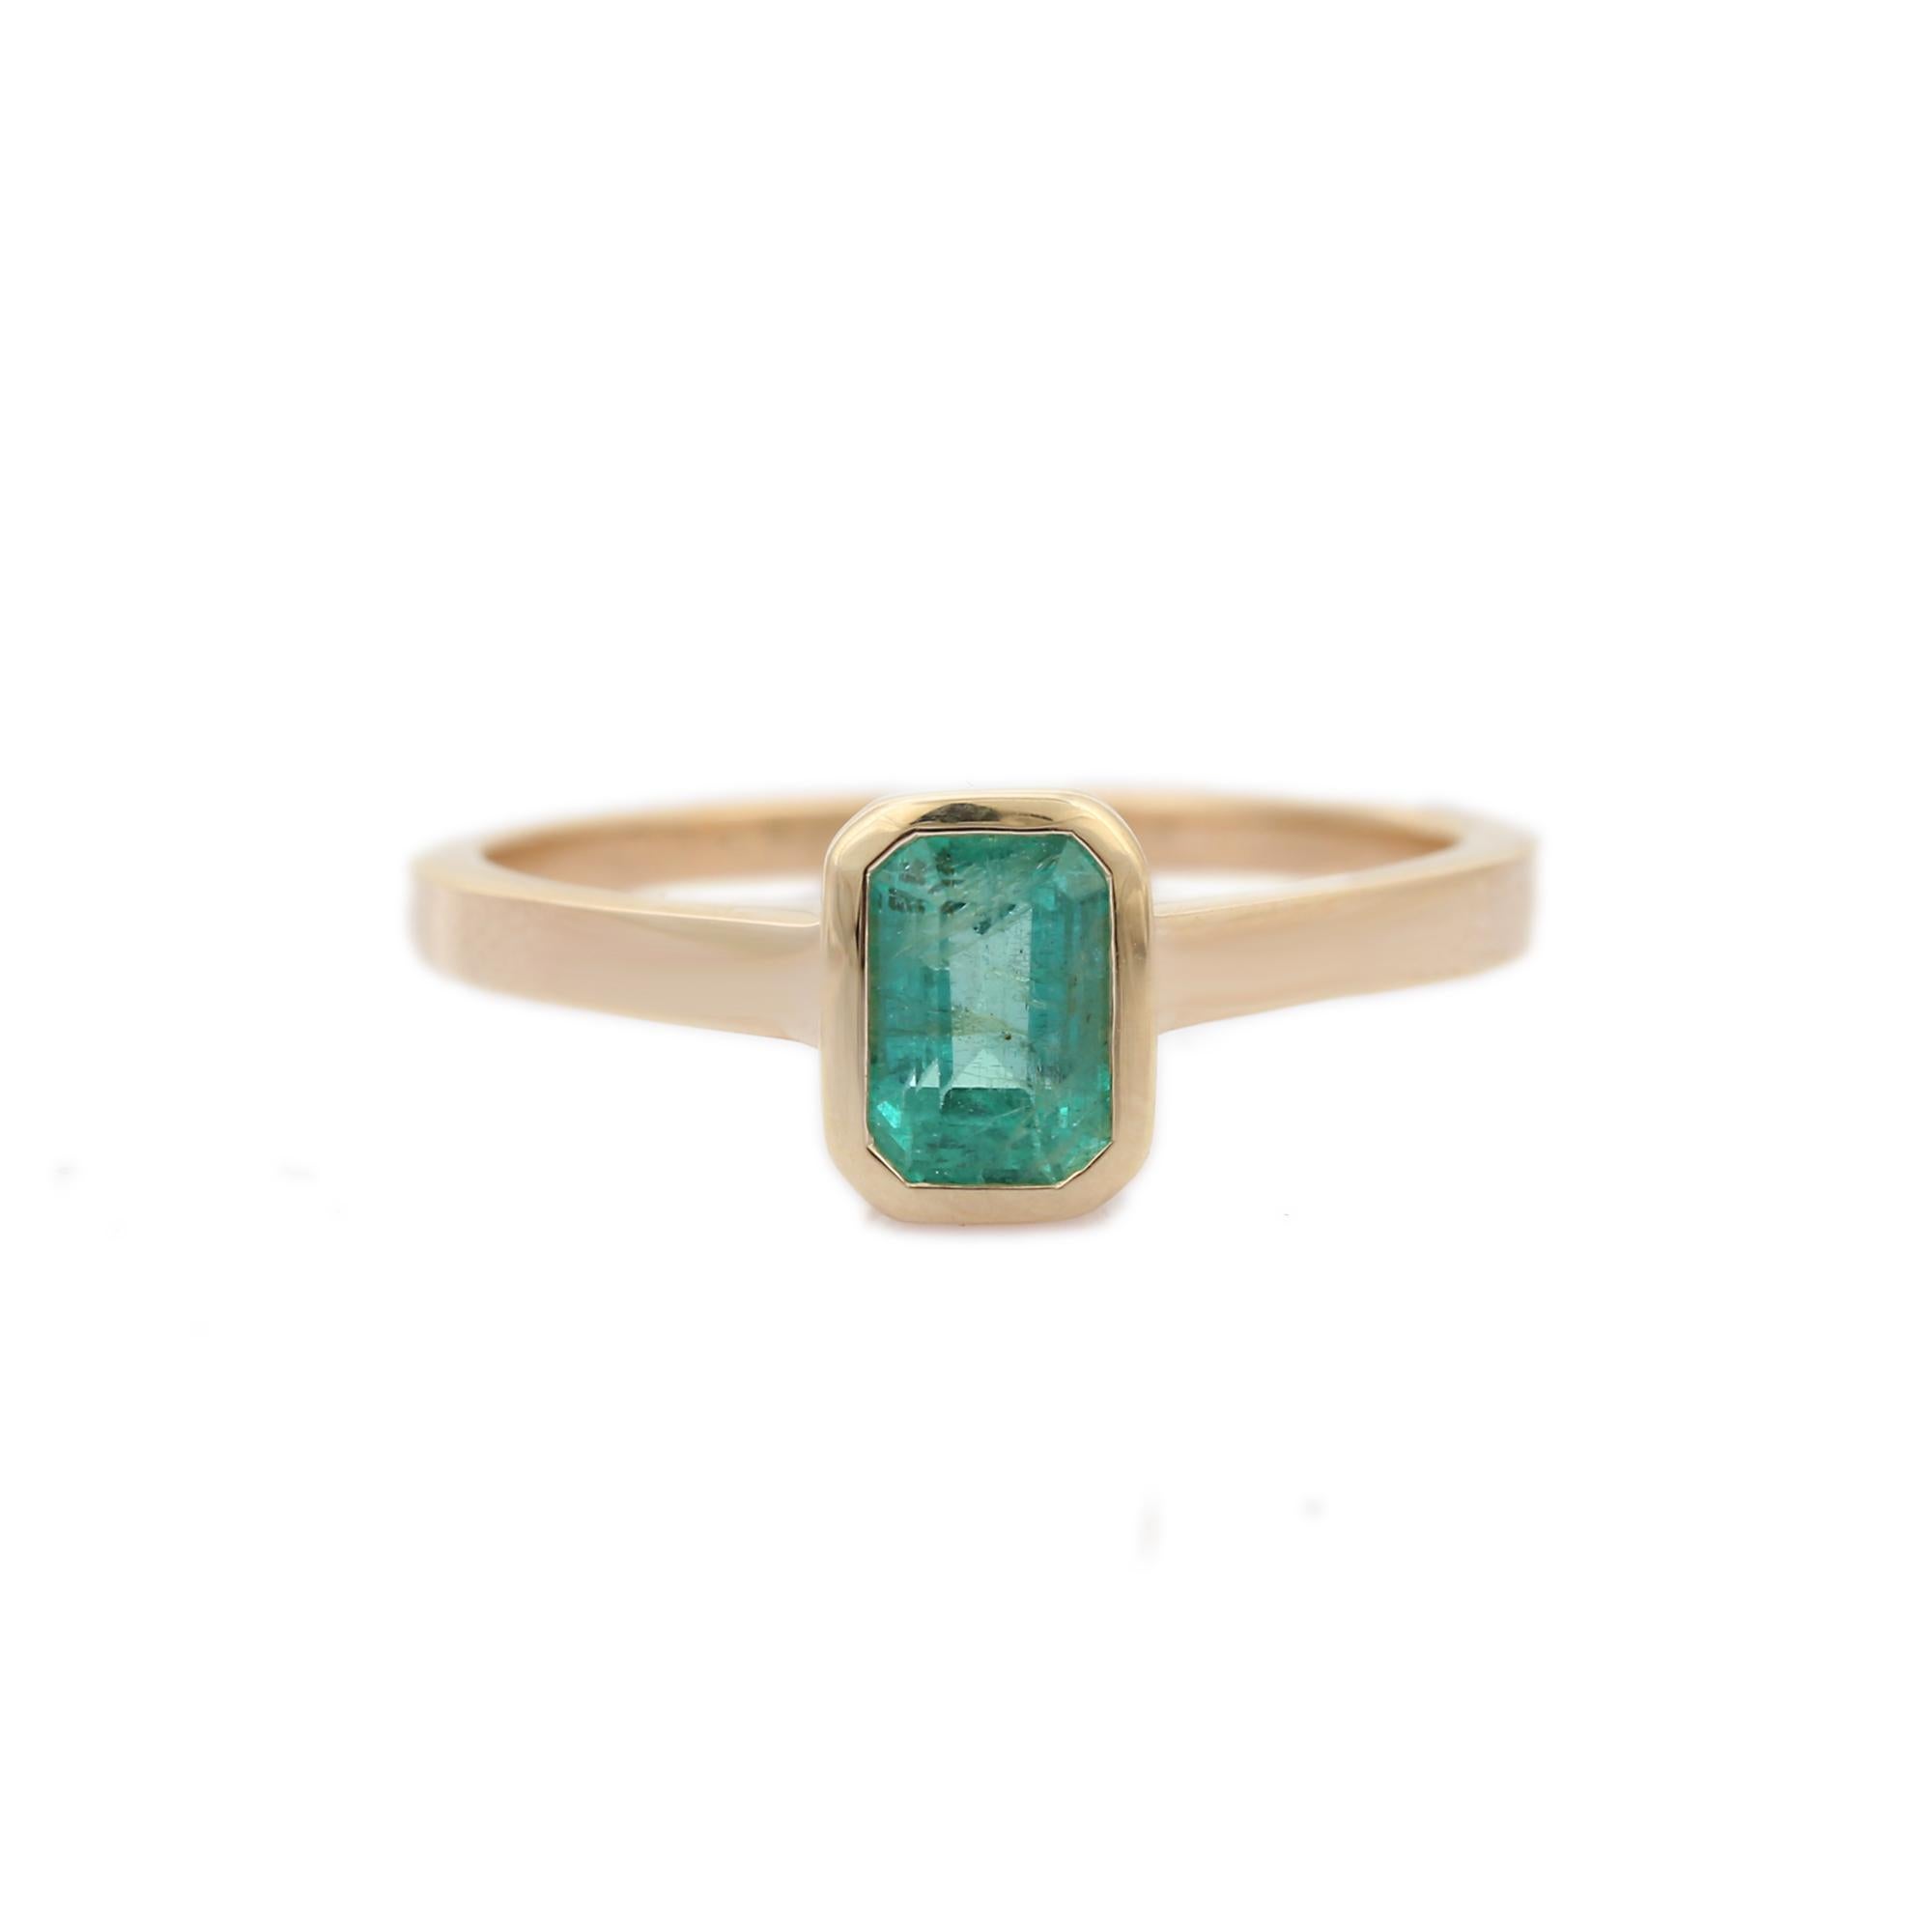 For Sale:  Handmade Bezel Set Emerald Single Stone Ring in 14k Solid Yellow Gold 2